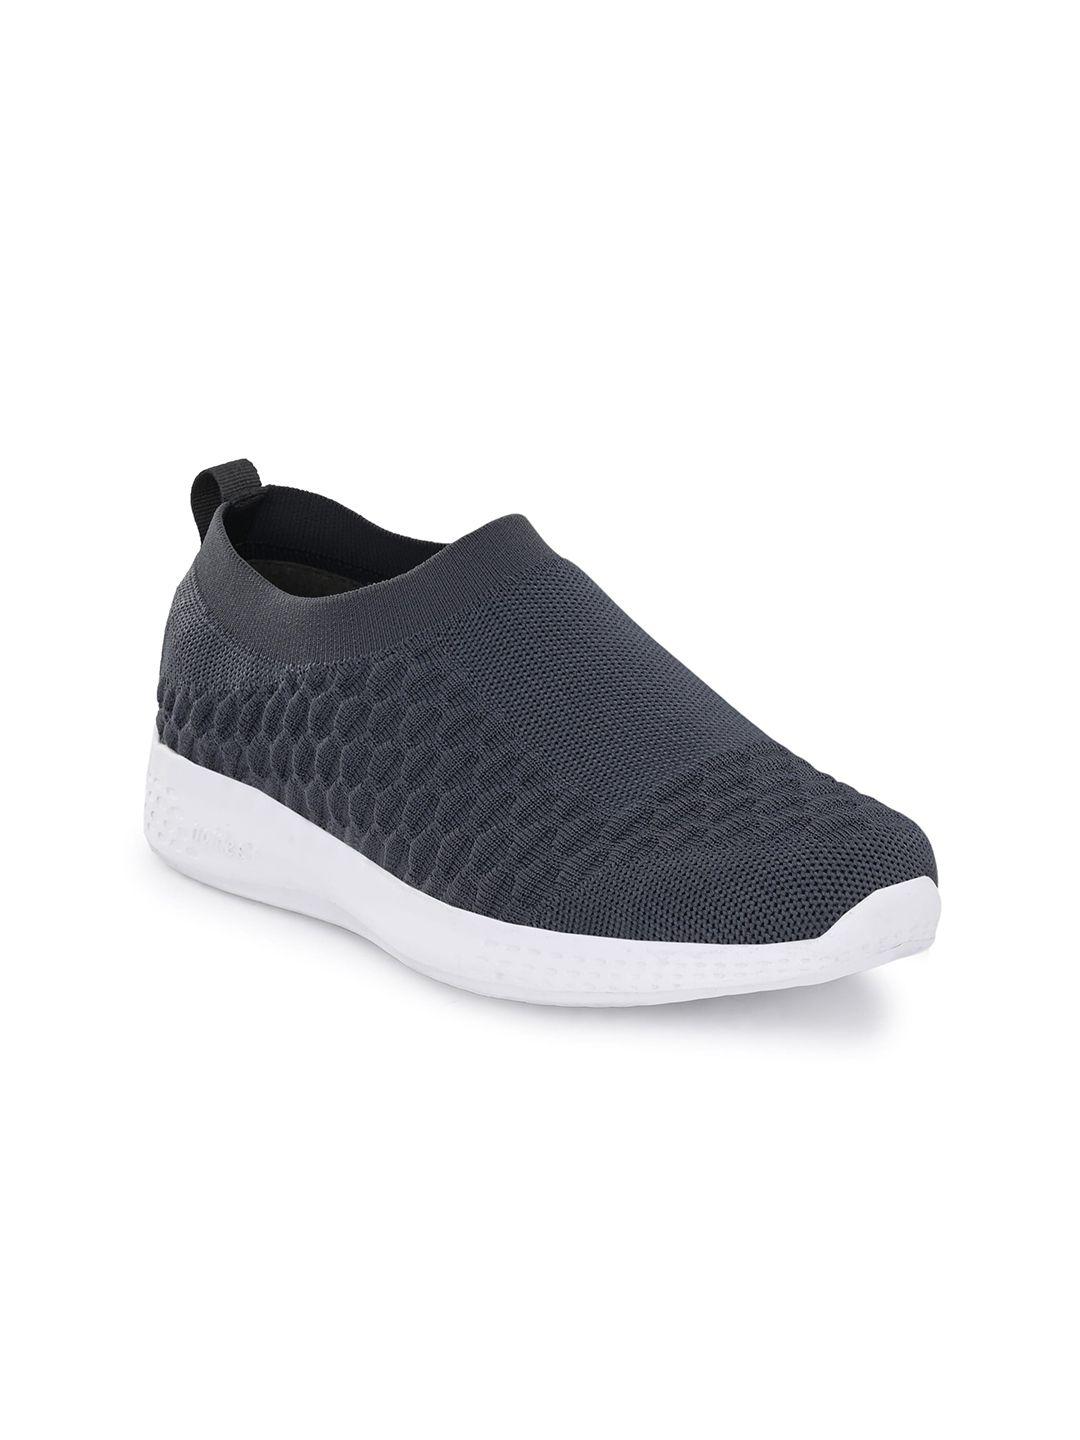 off limits women mesh mid top non-marking slip on walking shoes